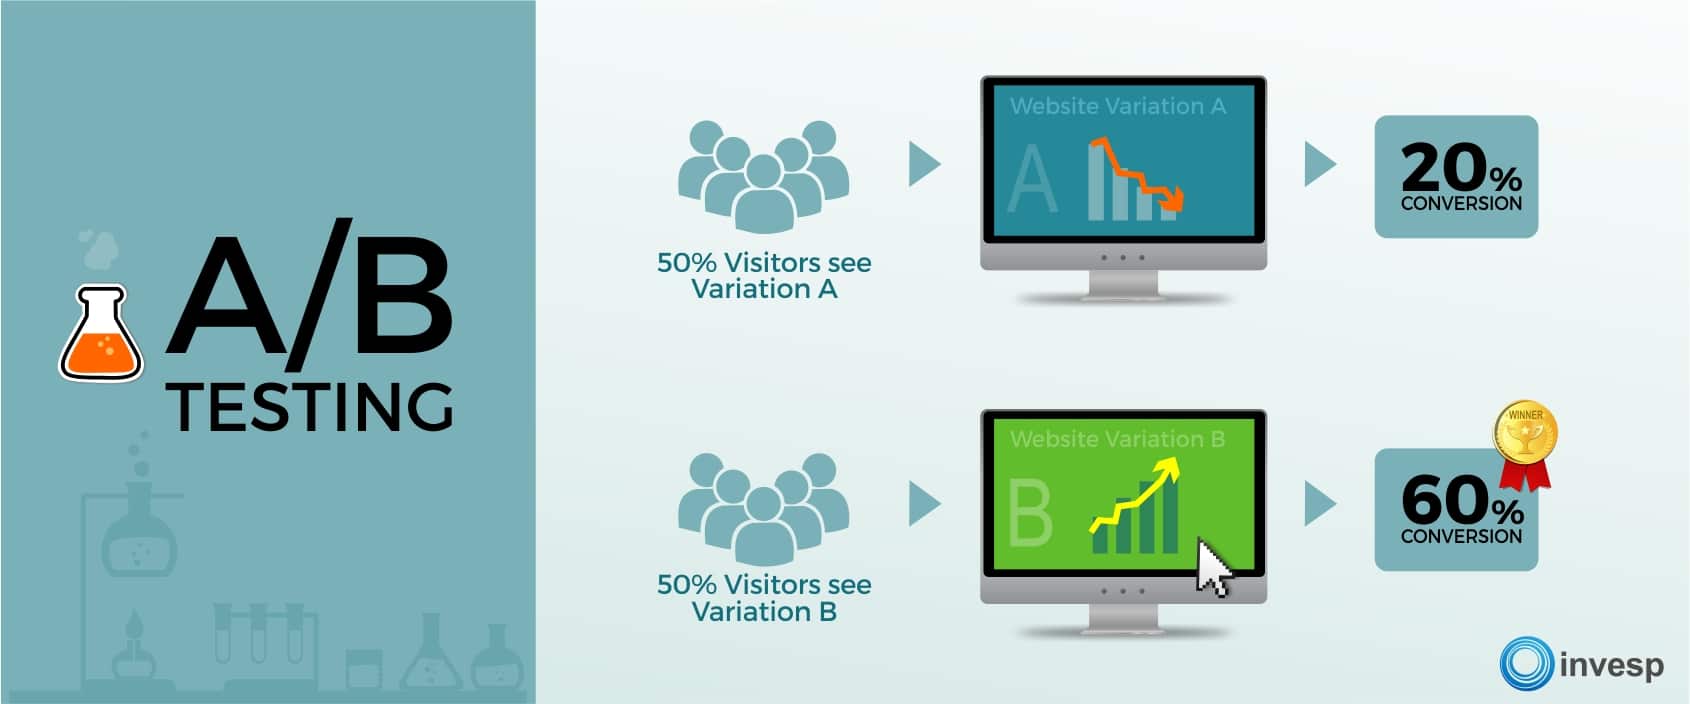 a blog image with a section boldly called A/B test and the other section showing an A/B test setup.